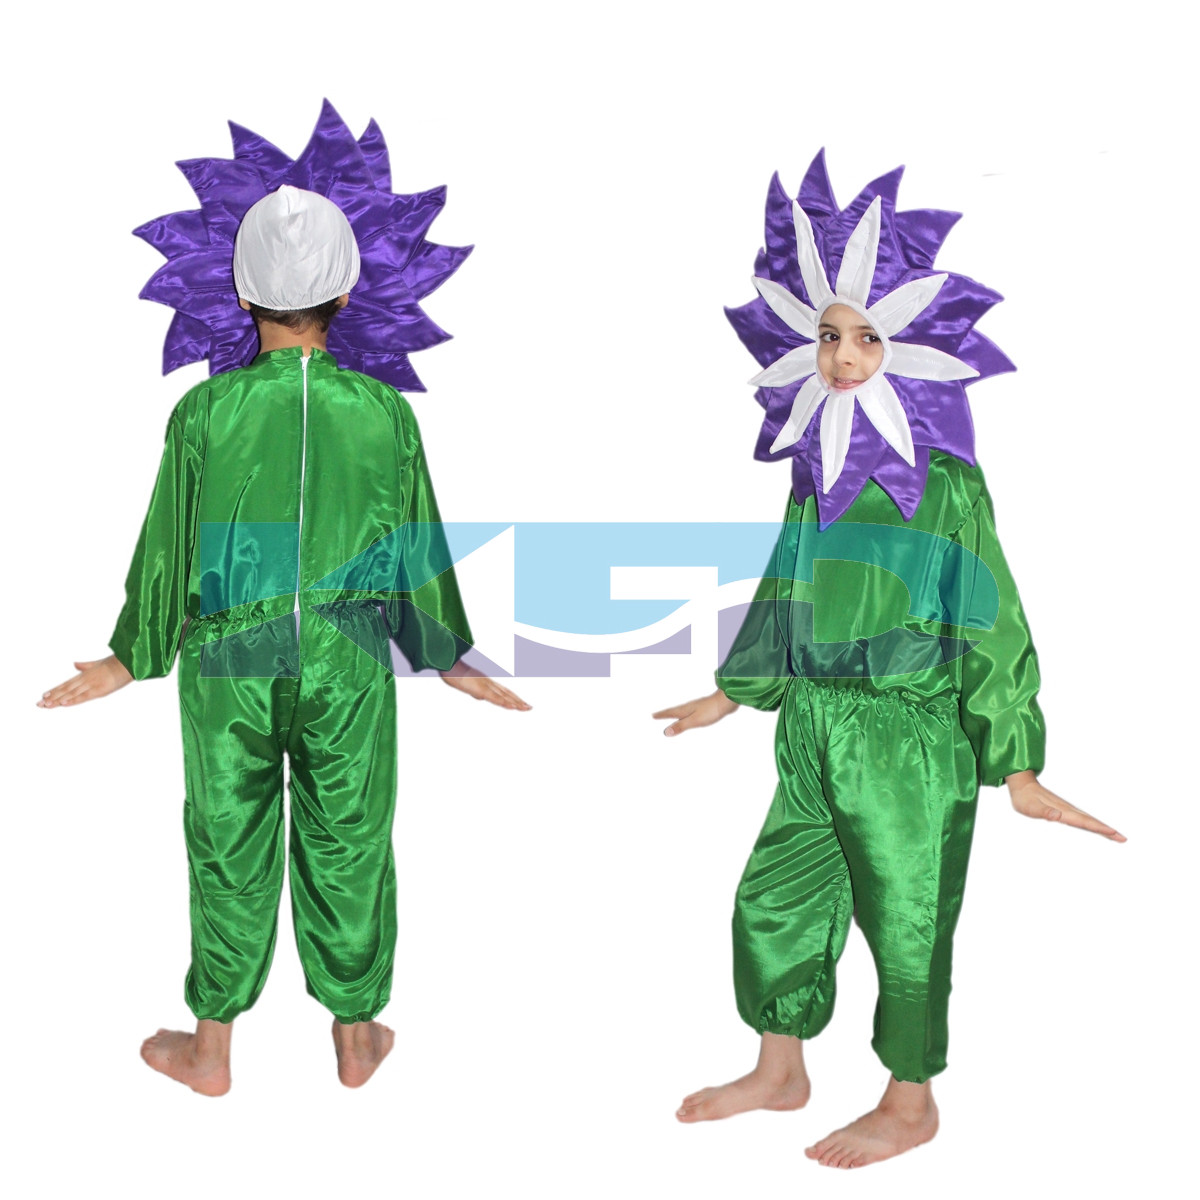  Purple flower Costume ,Nature Costume for School Annual function/Theme Party/Stage Shows/Competition/Birthday Party Dress